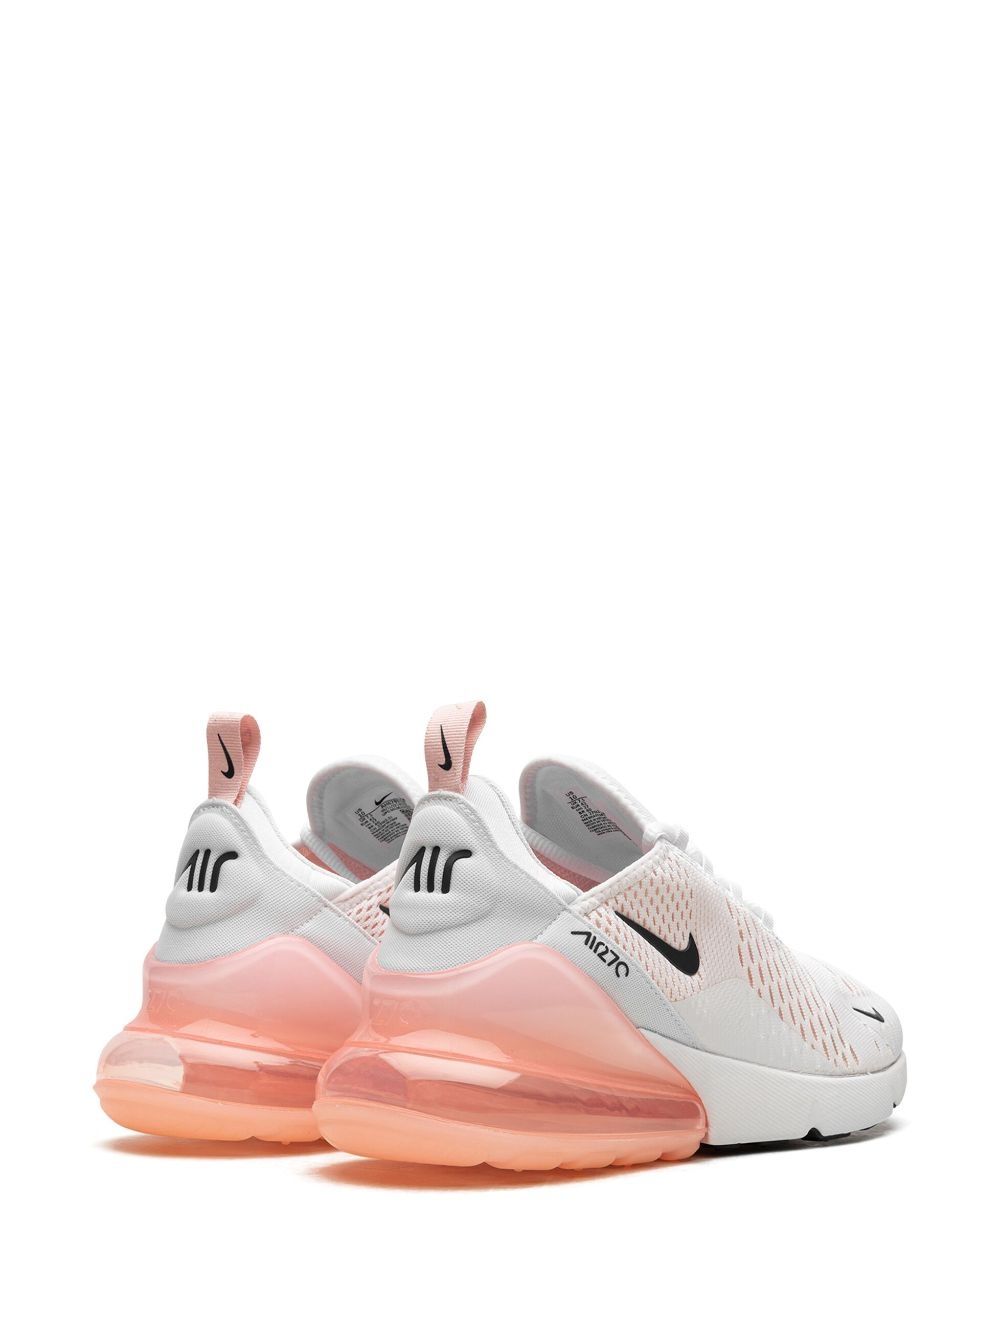 Air Max 270 "White Bleached Coral" sneakers - 3